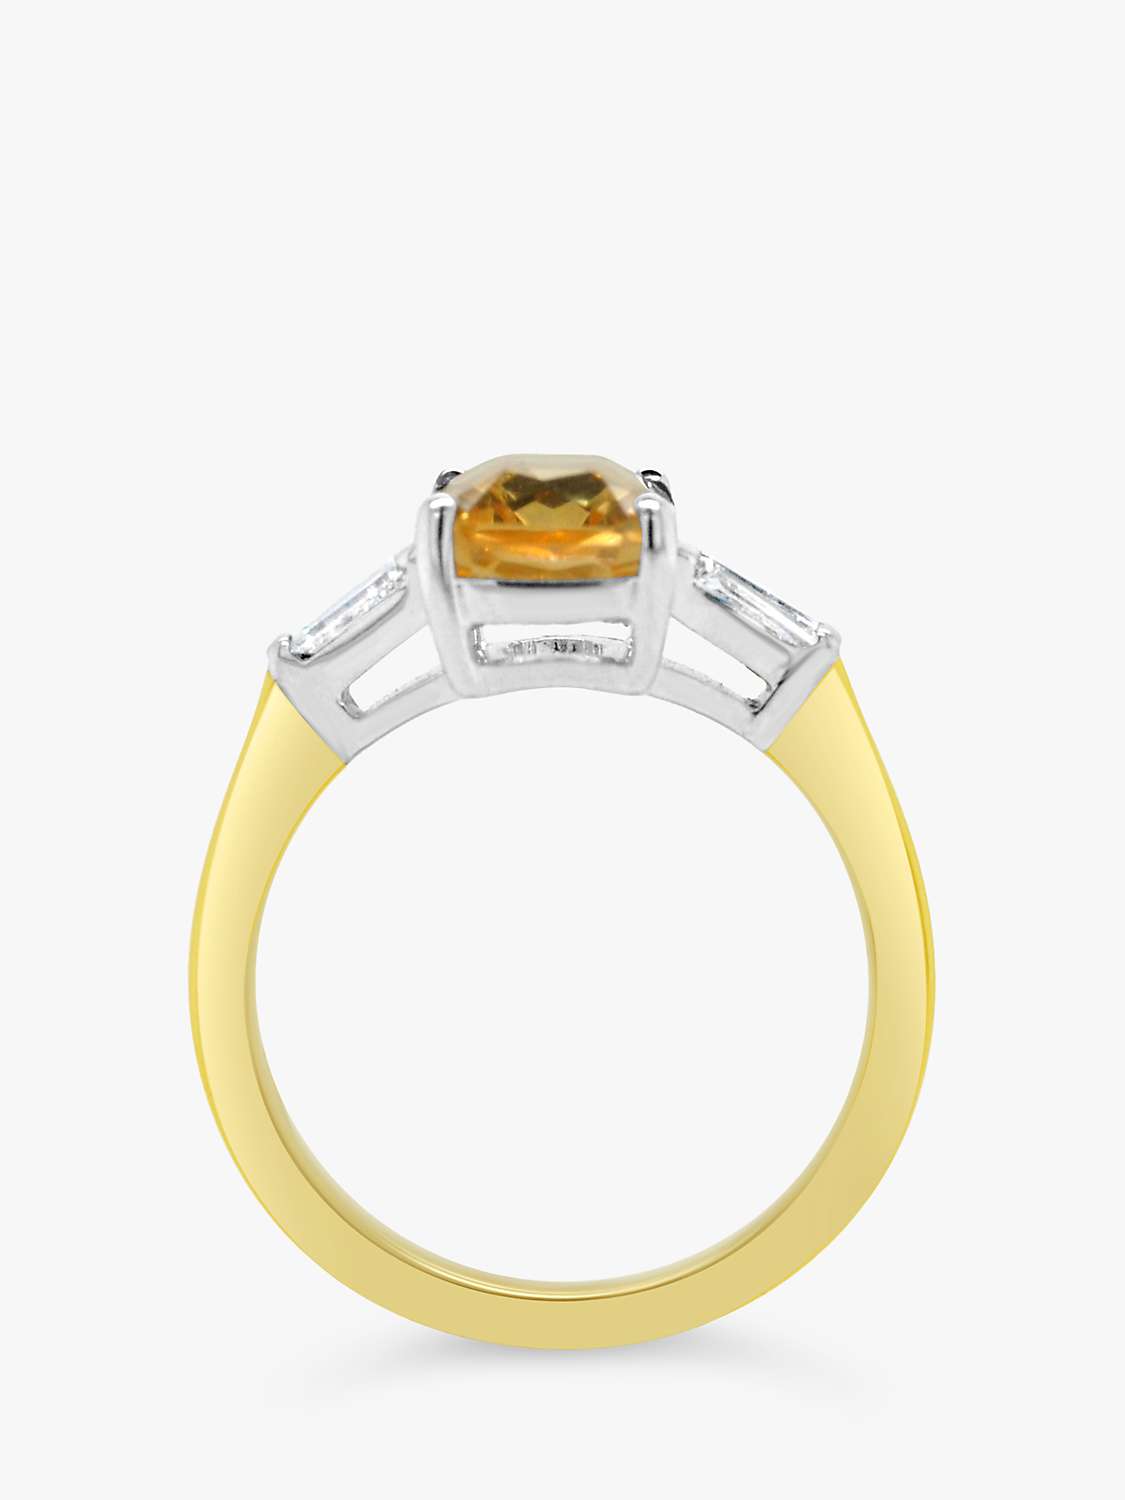 Buy Milton & Humble Jewellery Second Hand 18ct Gold Citrine & Diamond Cocktail Ring, Gold/Silver Online at johnlewis.com